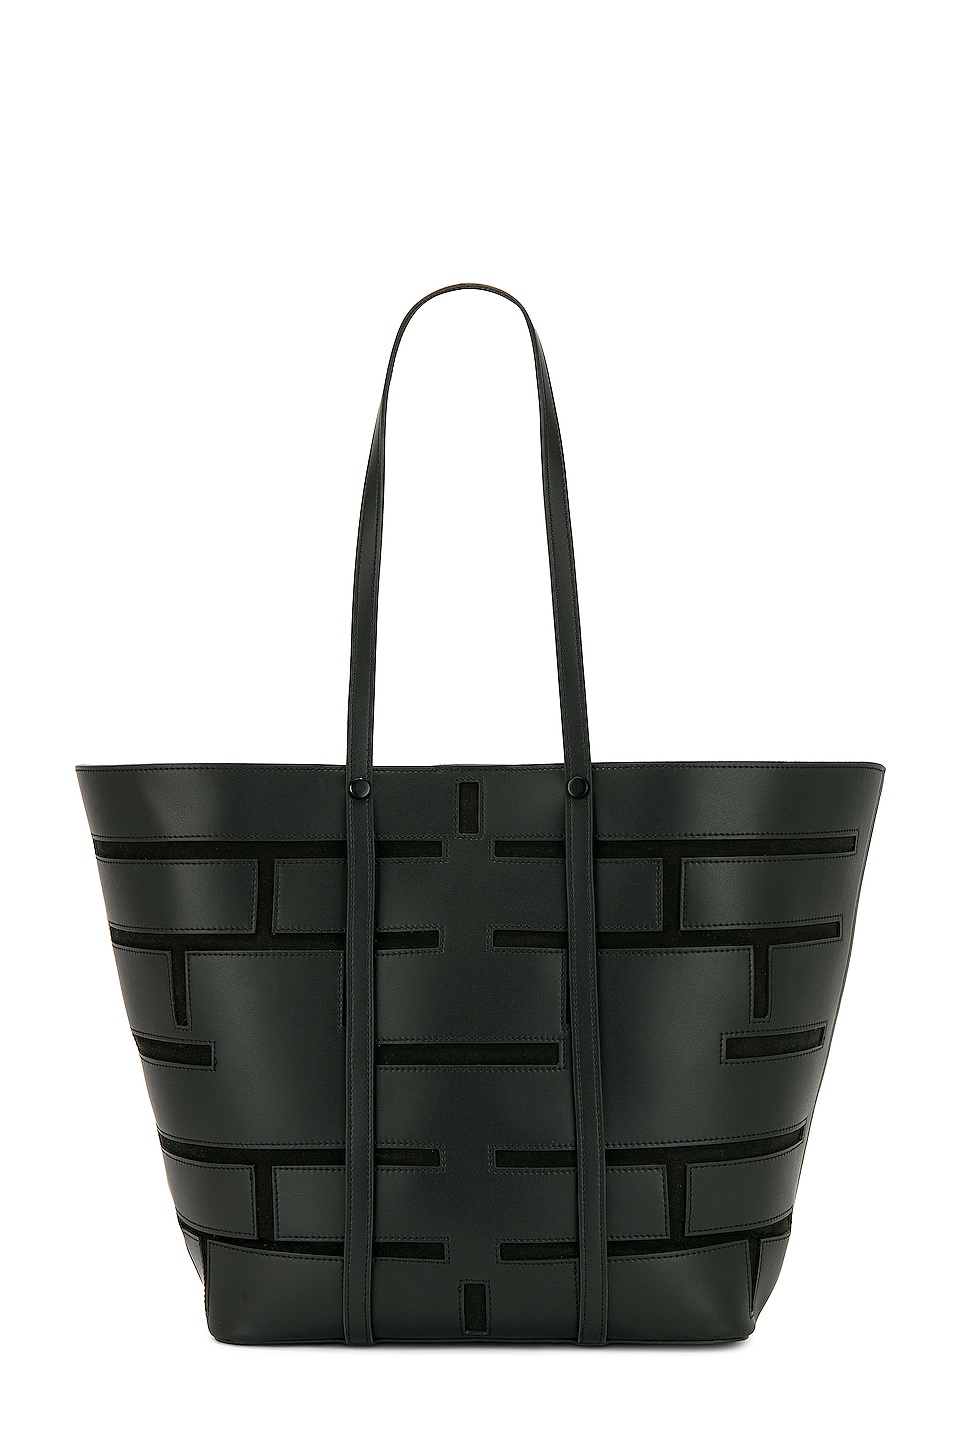 FRAME Plaque Cut Out Tote in Noir | REVOLVE